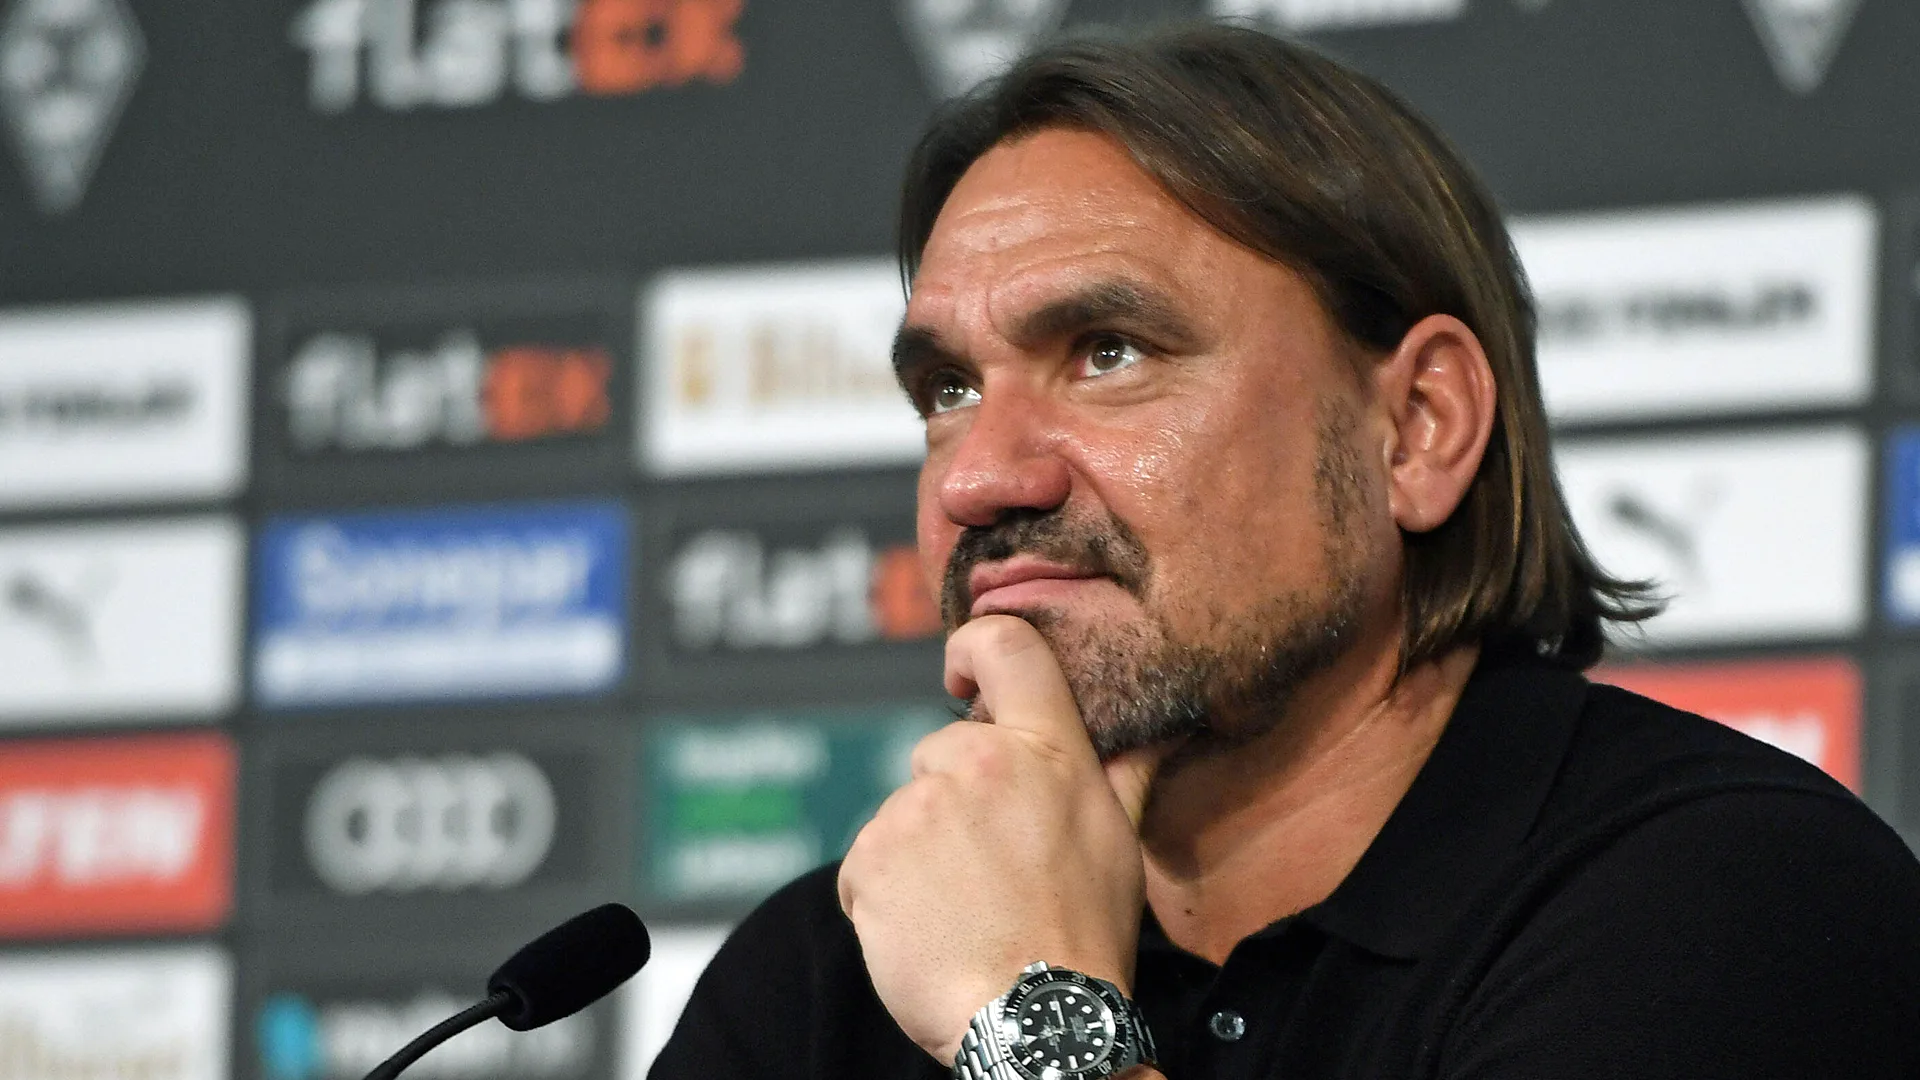 BBC Report: Leeds United defender has ‘responded tremendously’ in training to a behind-the-scenes chat with Daniel Farke….